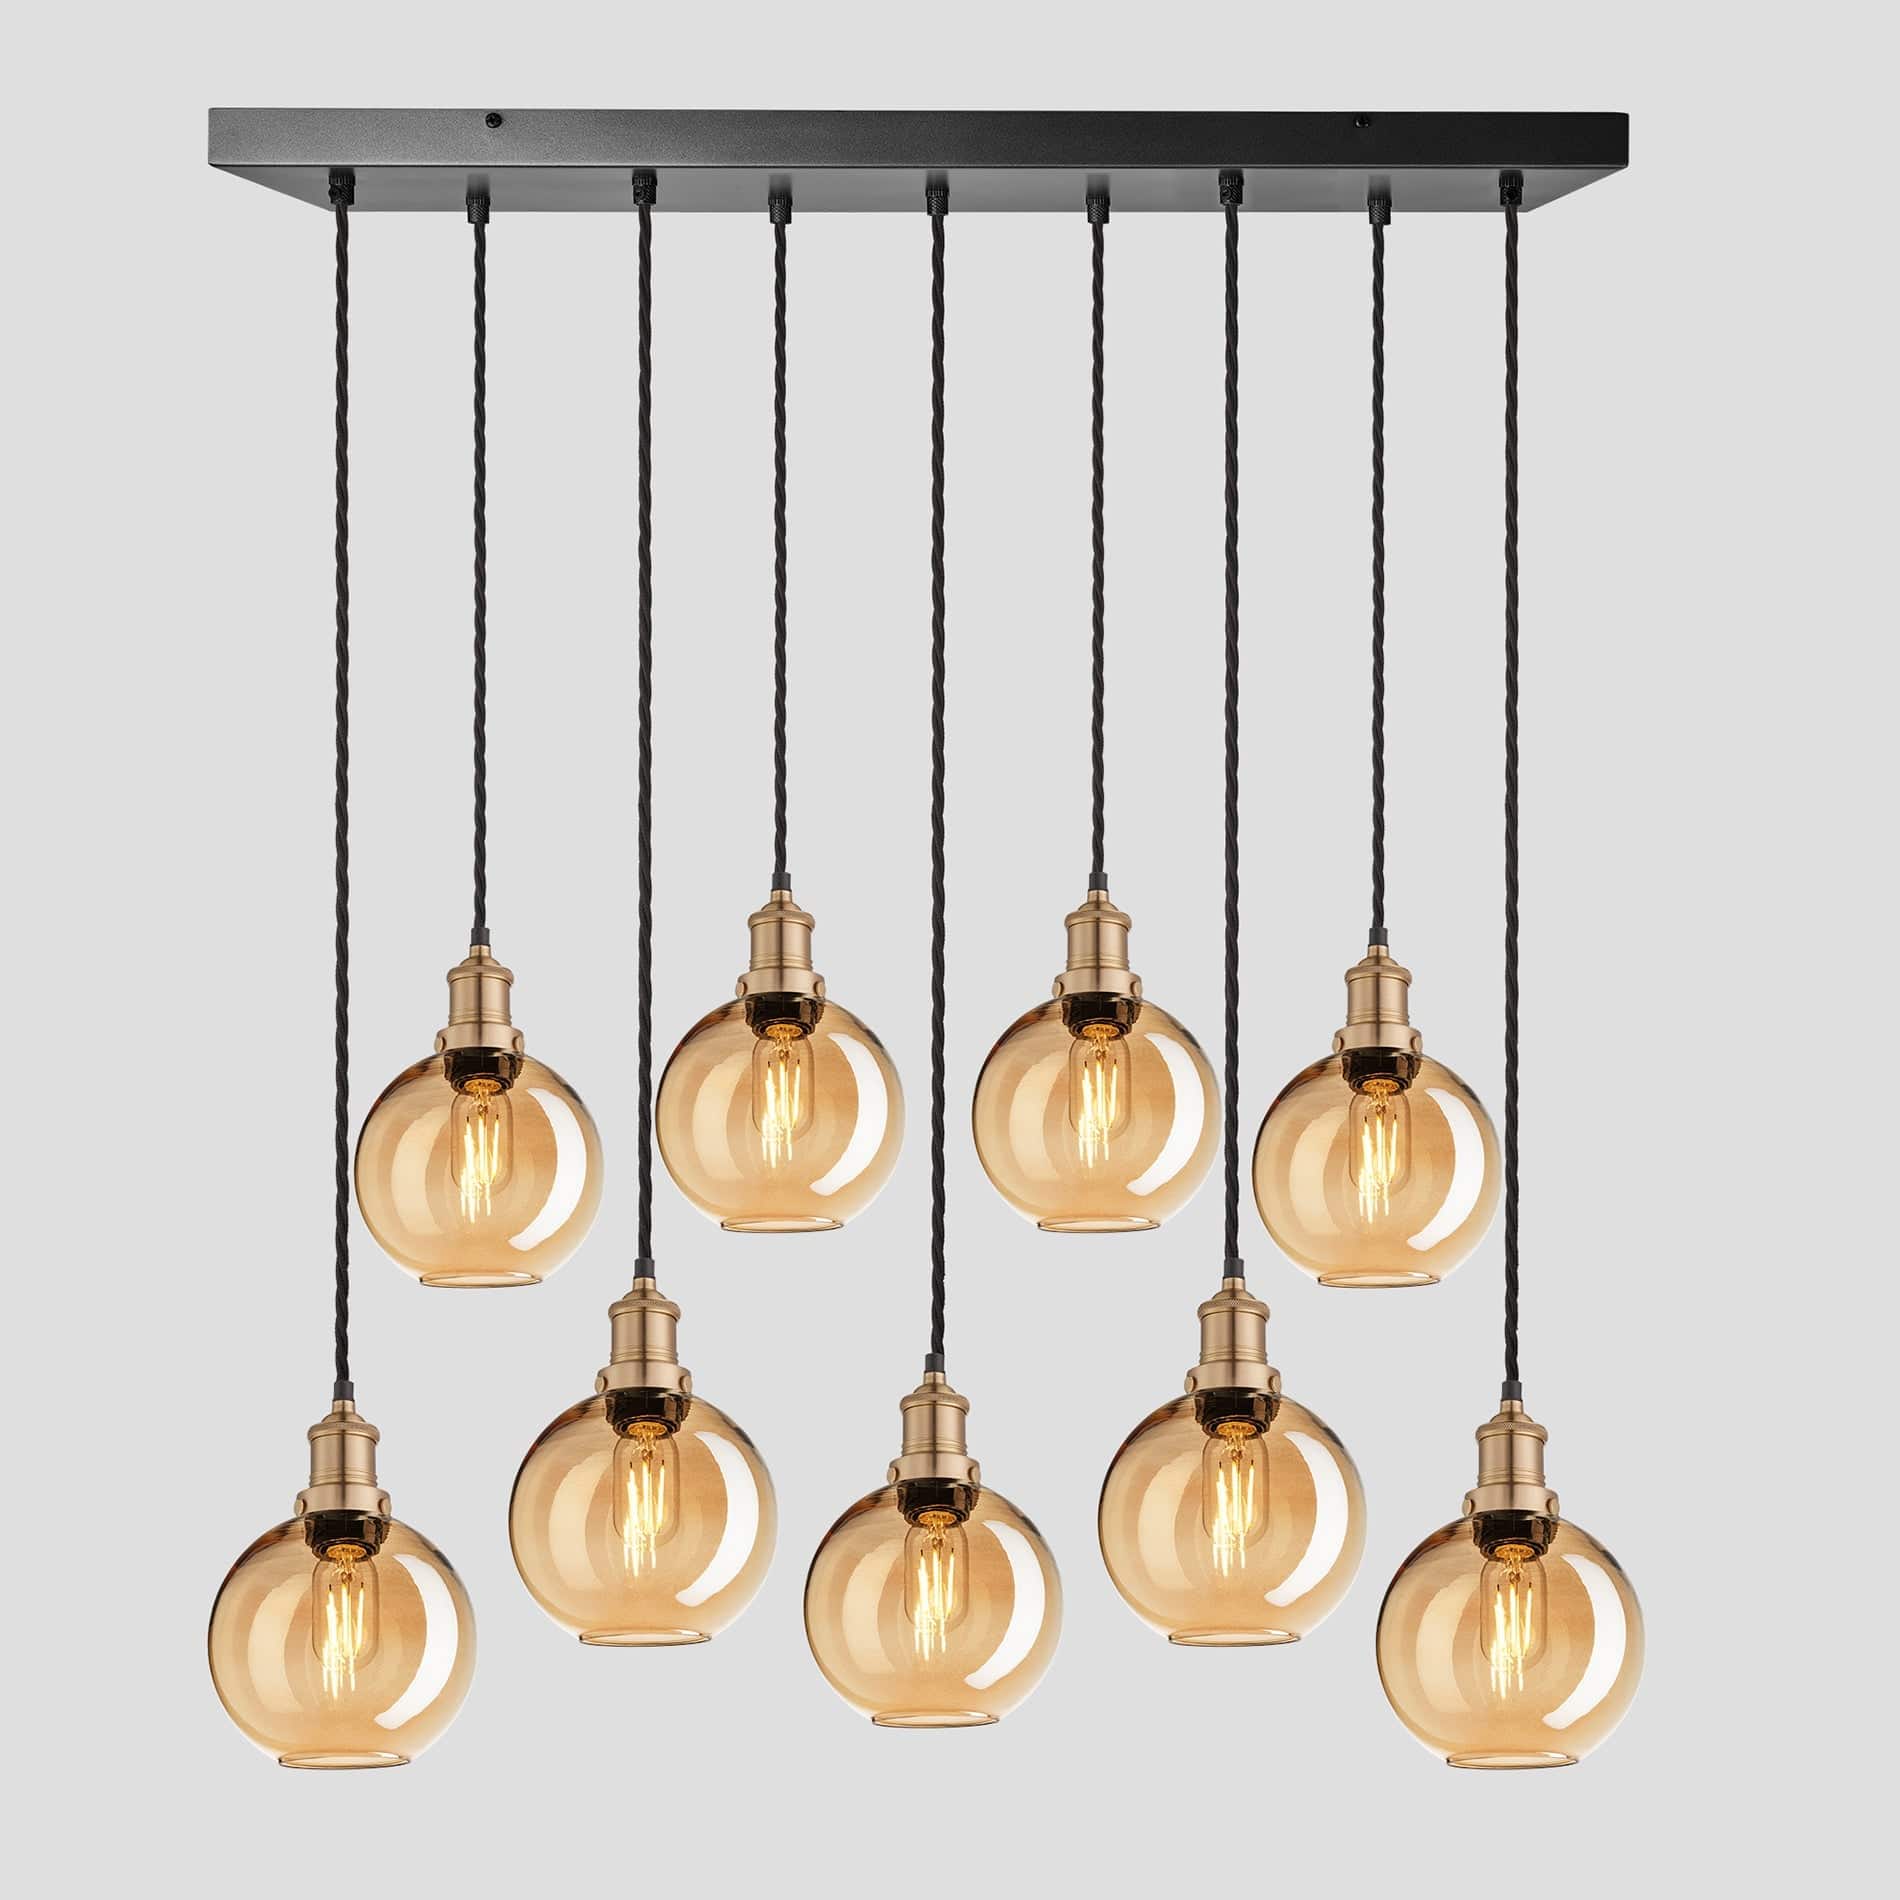 Brooklyn Tinted Glass Globe 9 Wire Cluster Lights - 7 inch - Amber Industville BR-TGL-GL7-9WCL-A-BH